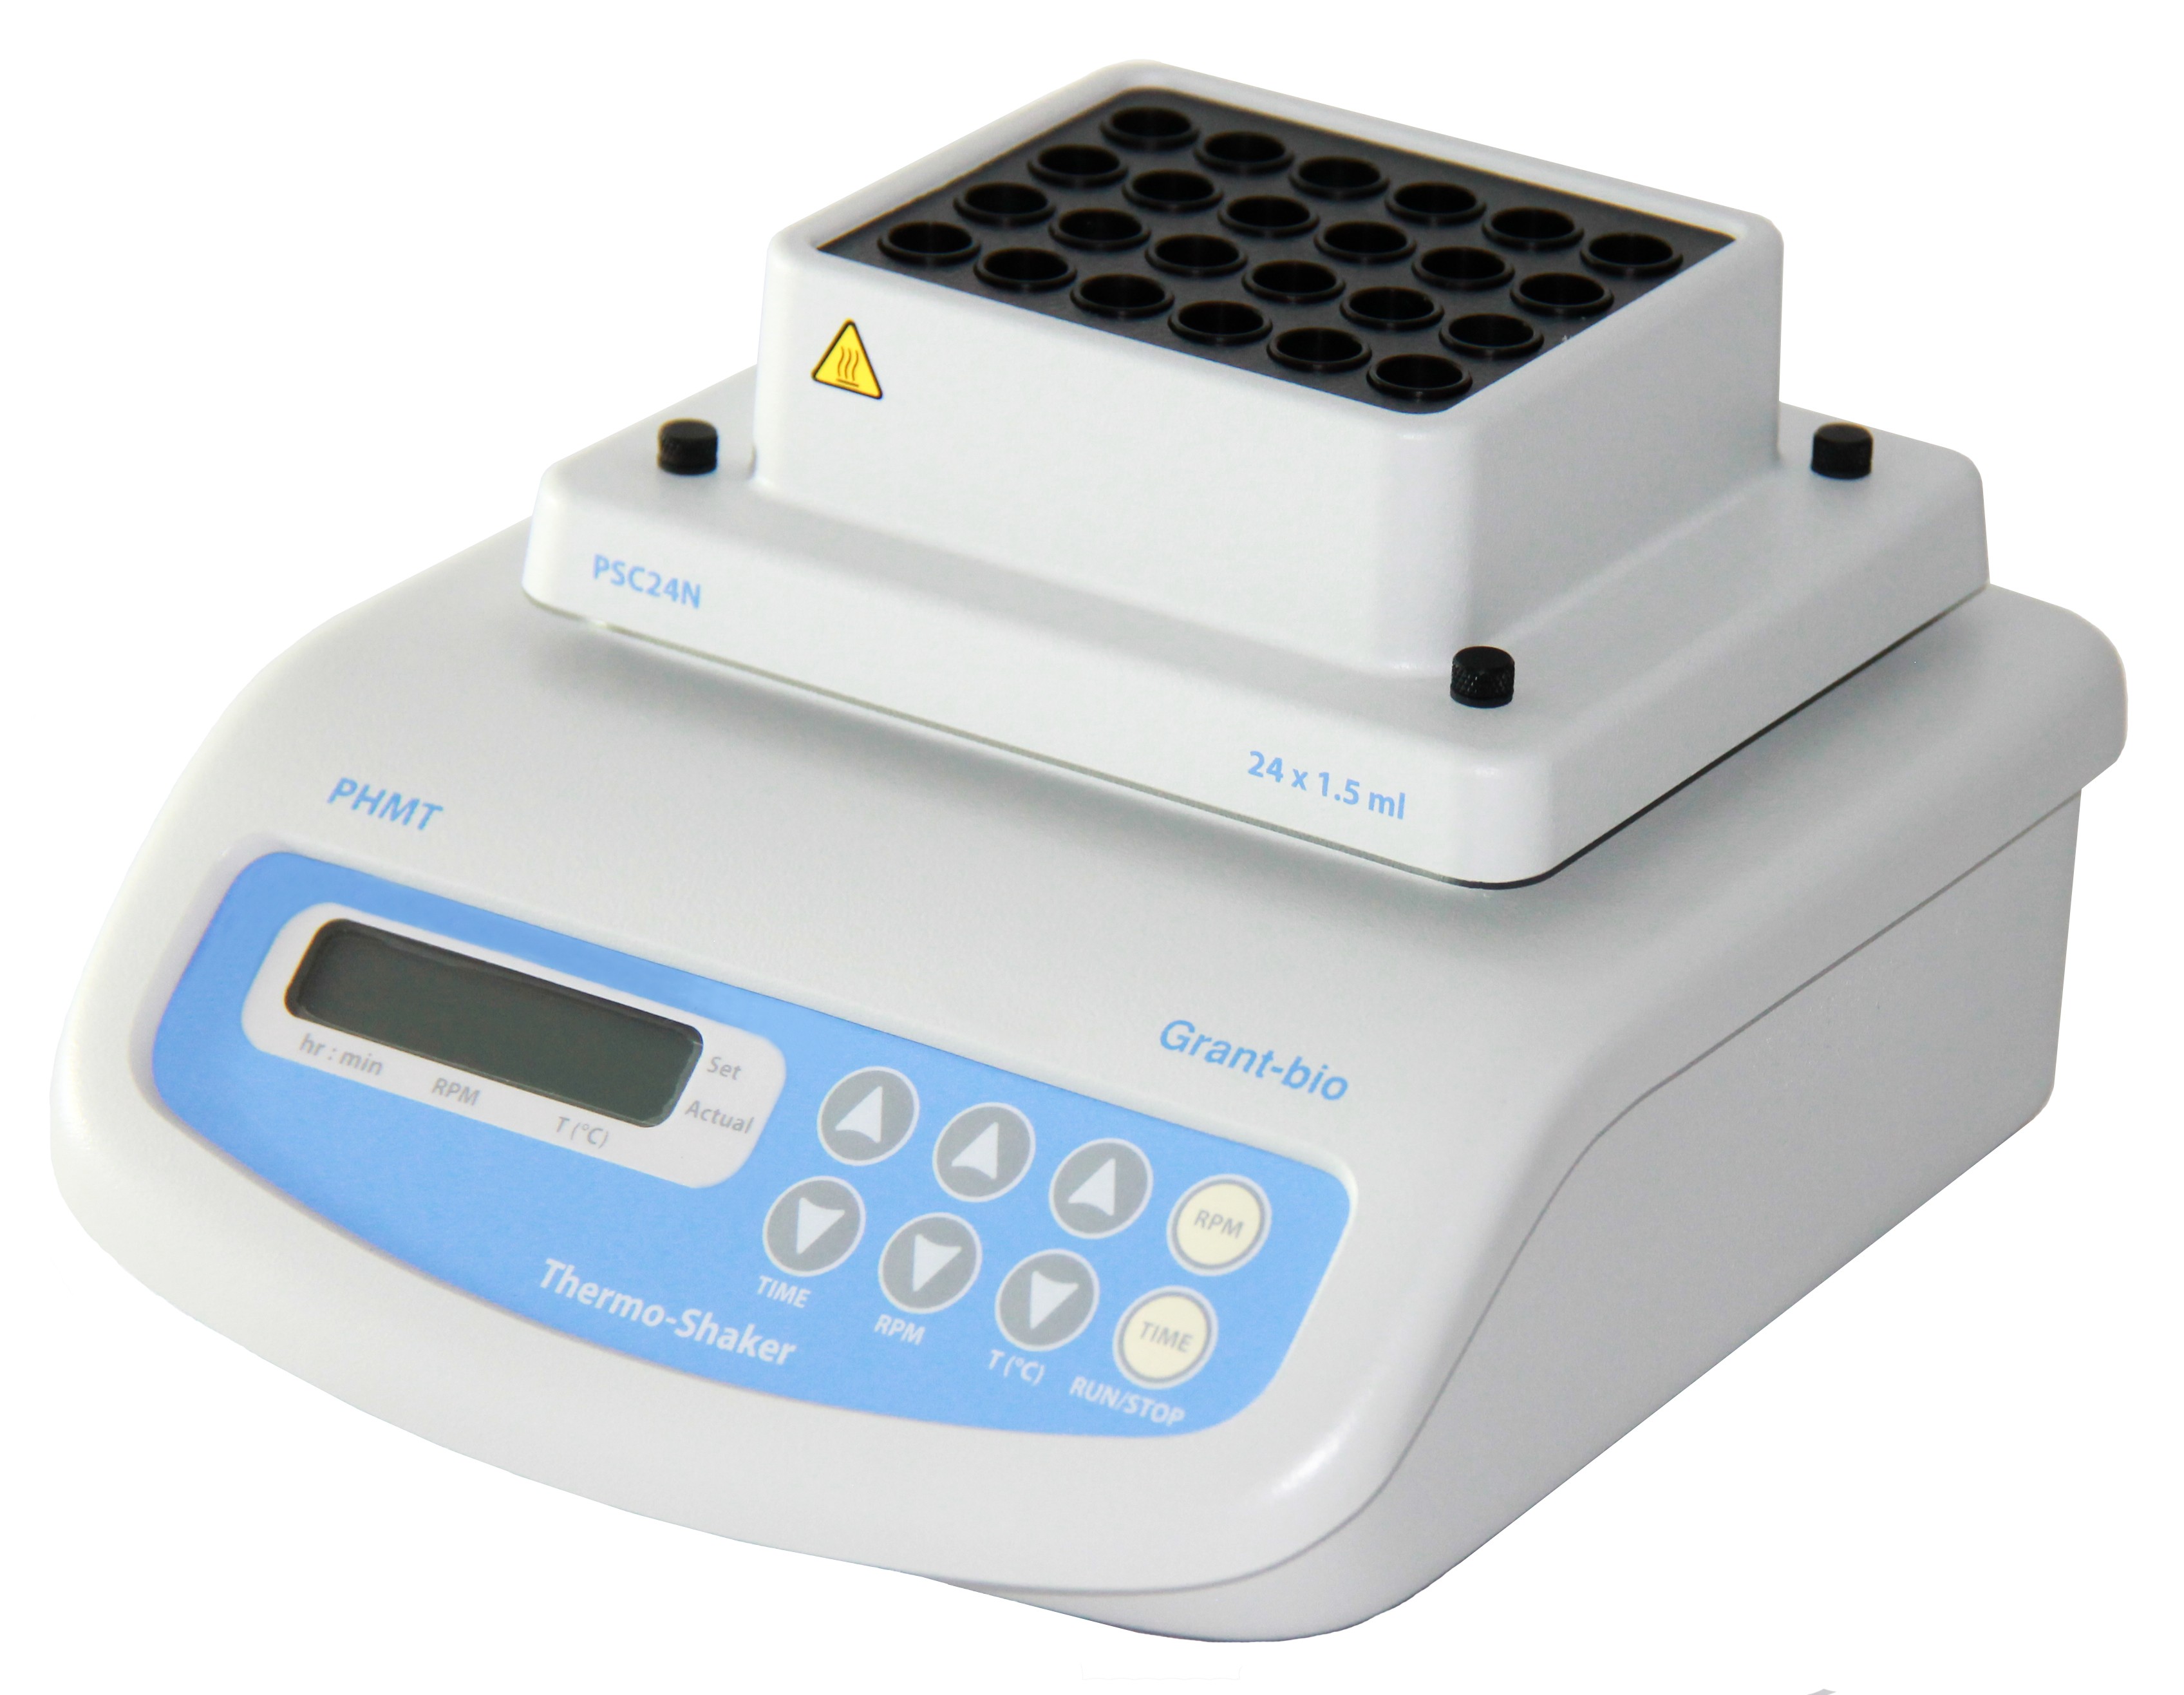 PHMT-PSC24N - Grant Bio PHMT Thermoshaker For Microtubes And Microplates